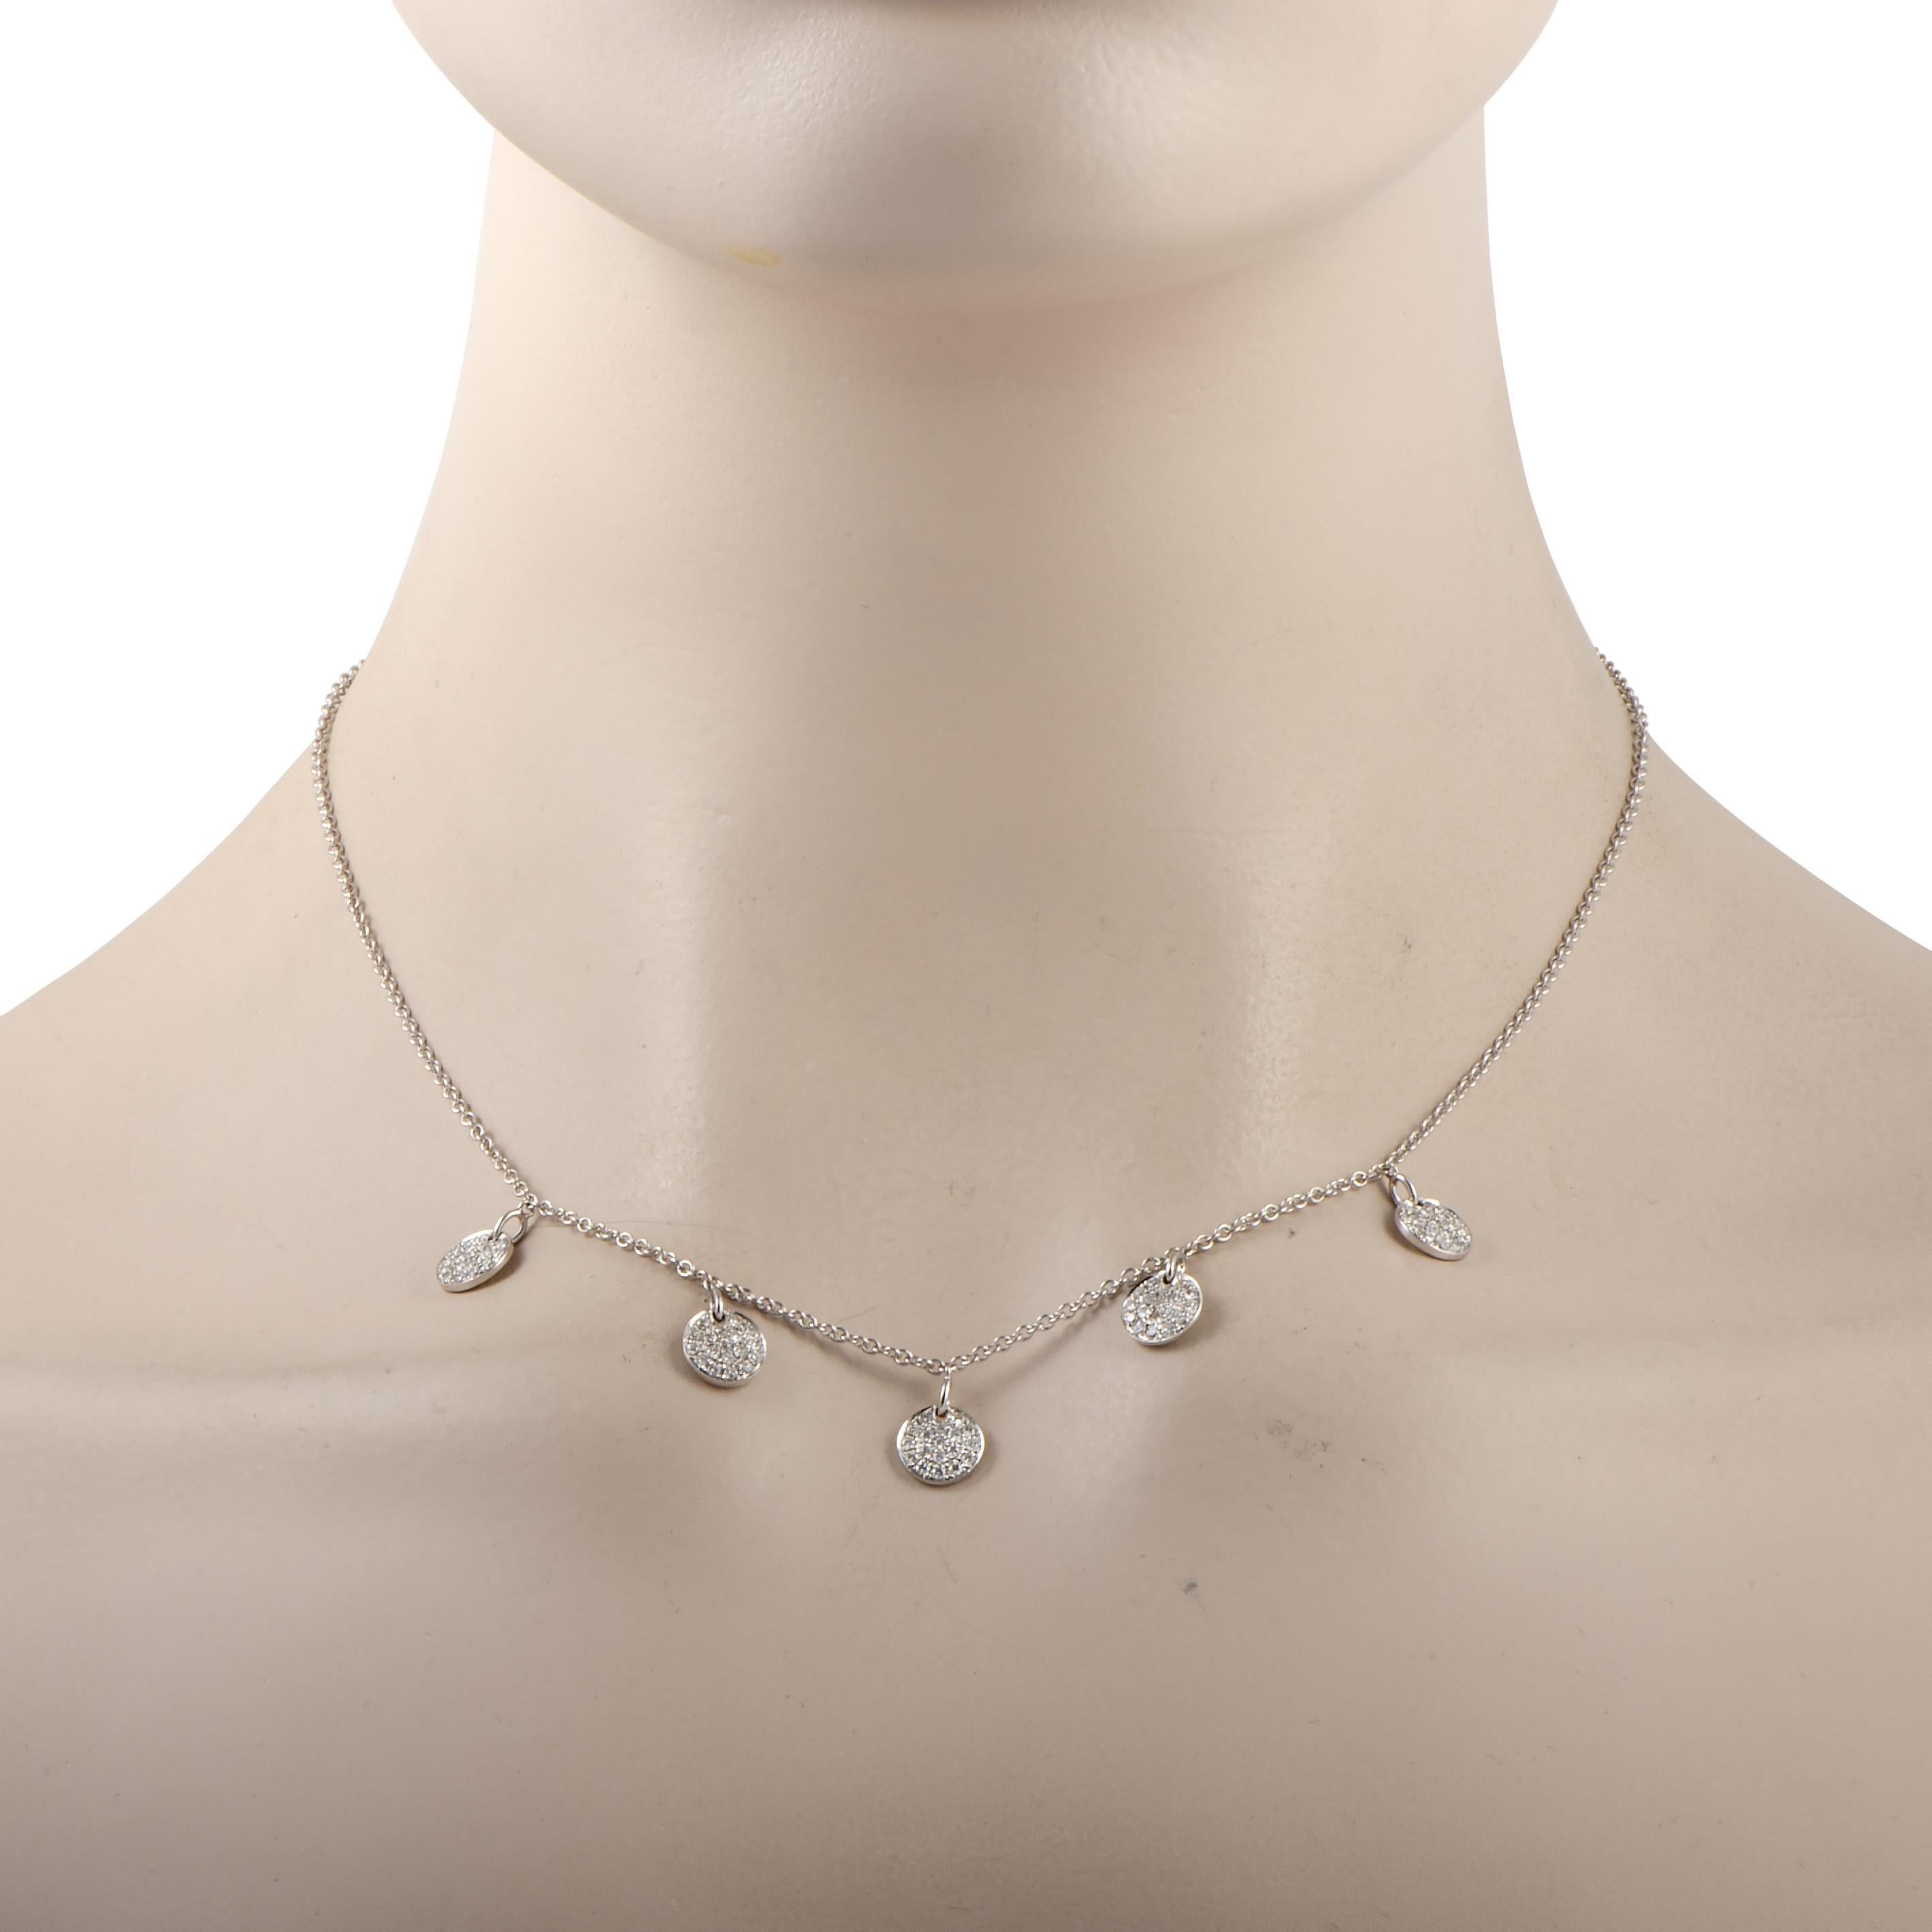 This LB Exclusive necklace is crafted from 18K white gold and set with a total of 0.78 carats of diamonds. The necklace weighs 6.9 grams and boasts an 8” chain with lobster claw closure.

Offered in brand new condition, this jewelry piece includes a